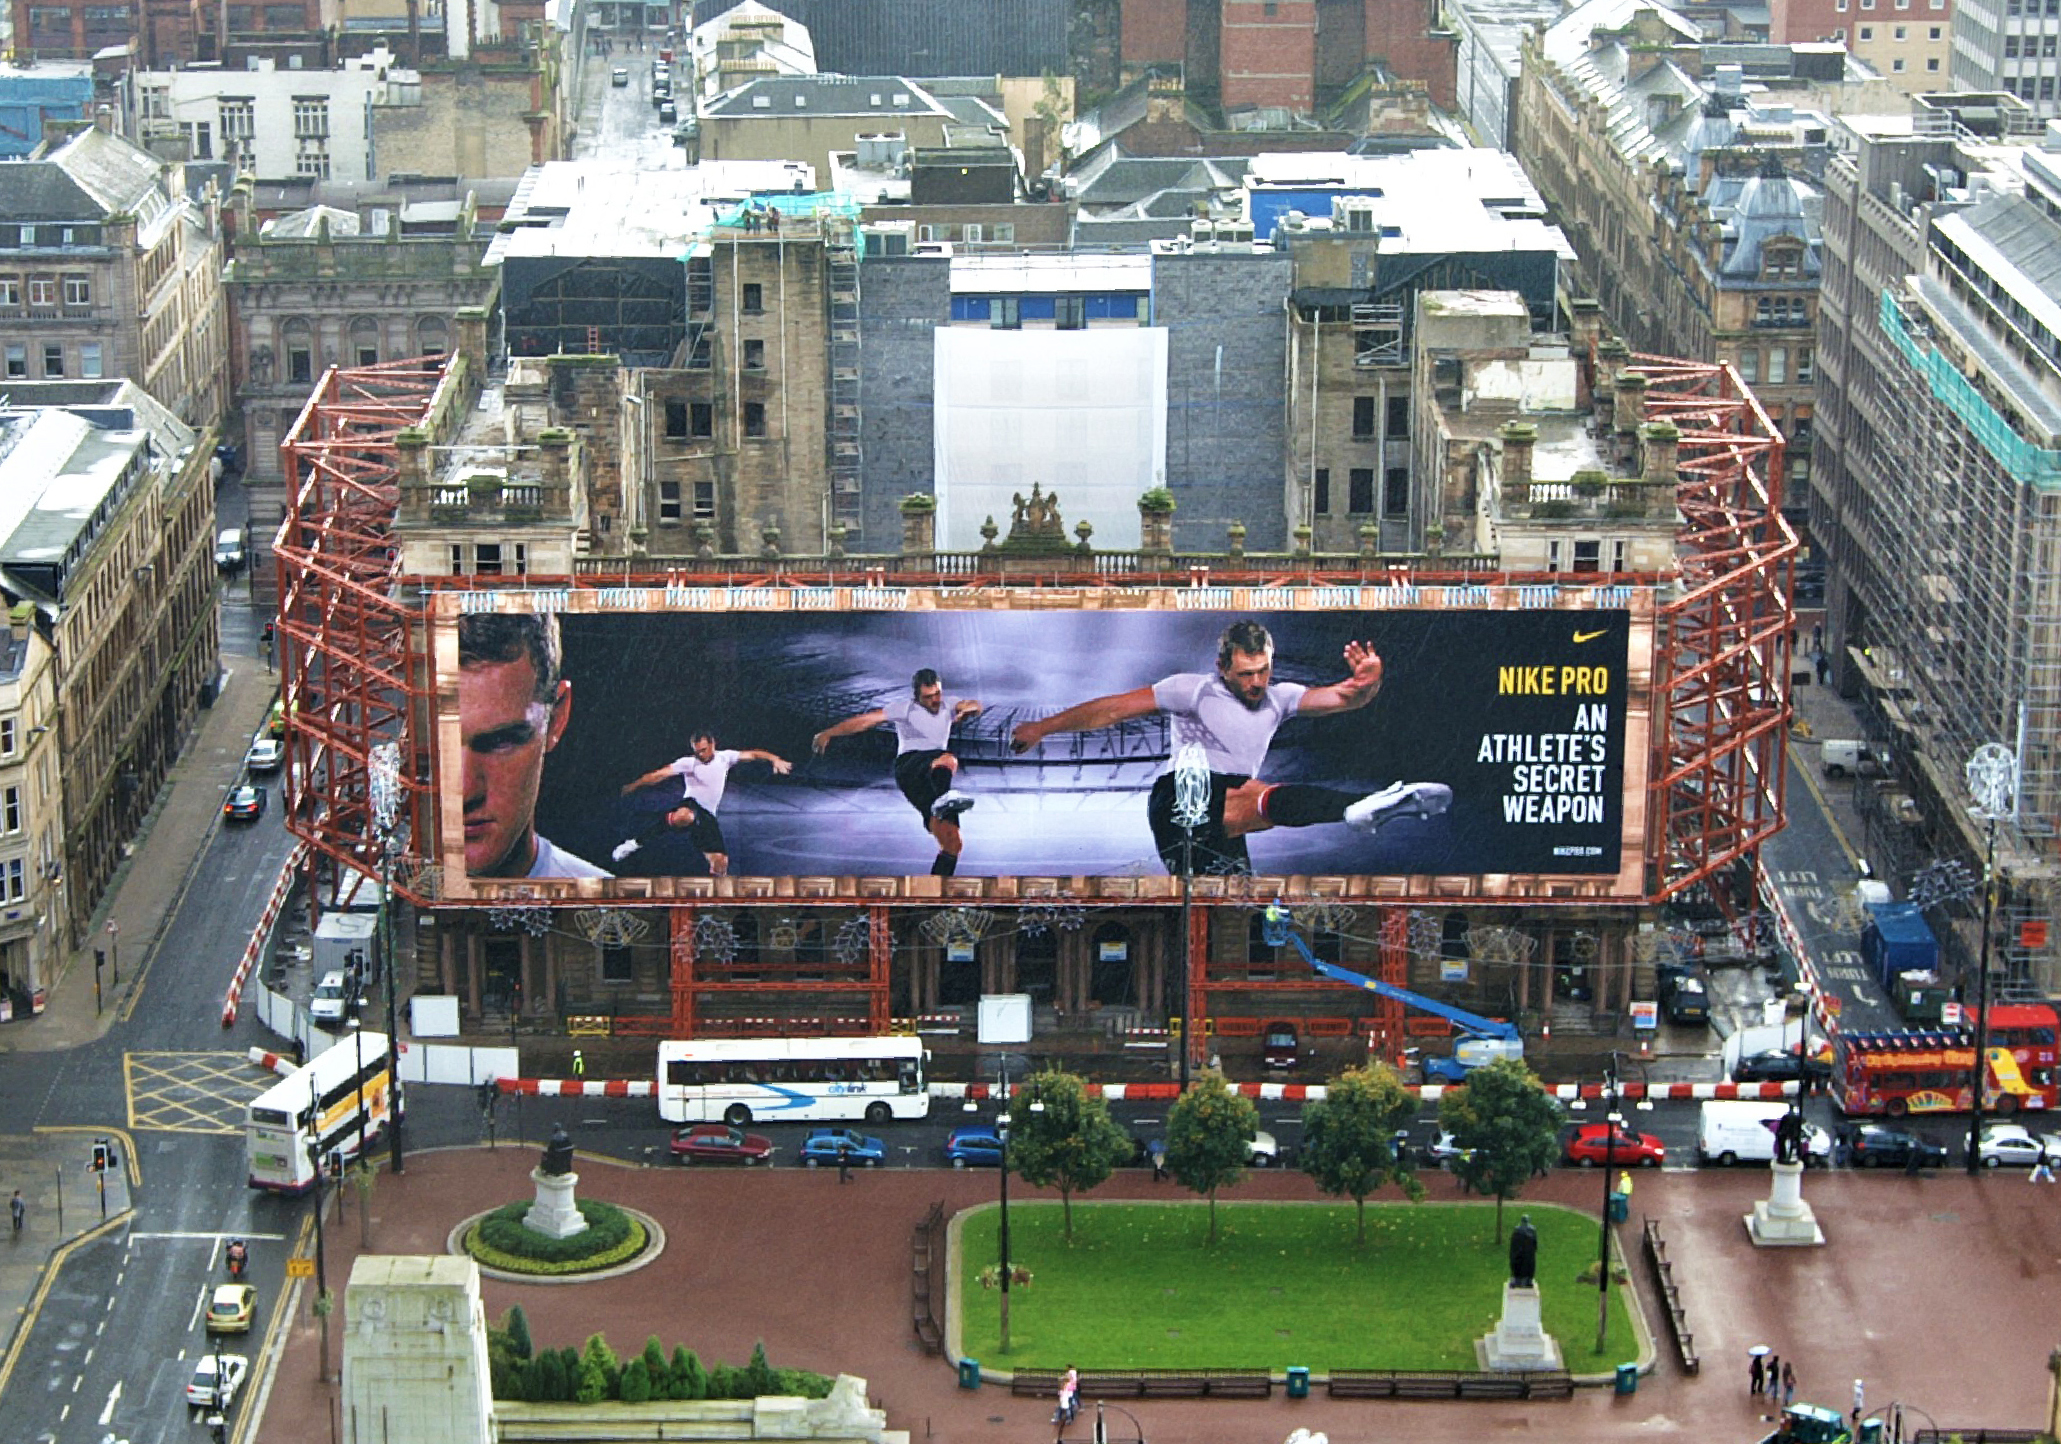 Aerial view of g1 building glasgow with temporary works steel propping positioned around the perimeter of the building. Large general advertising banner positioned to front of the building showing a Nike advert.